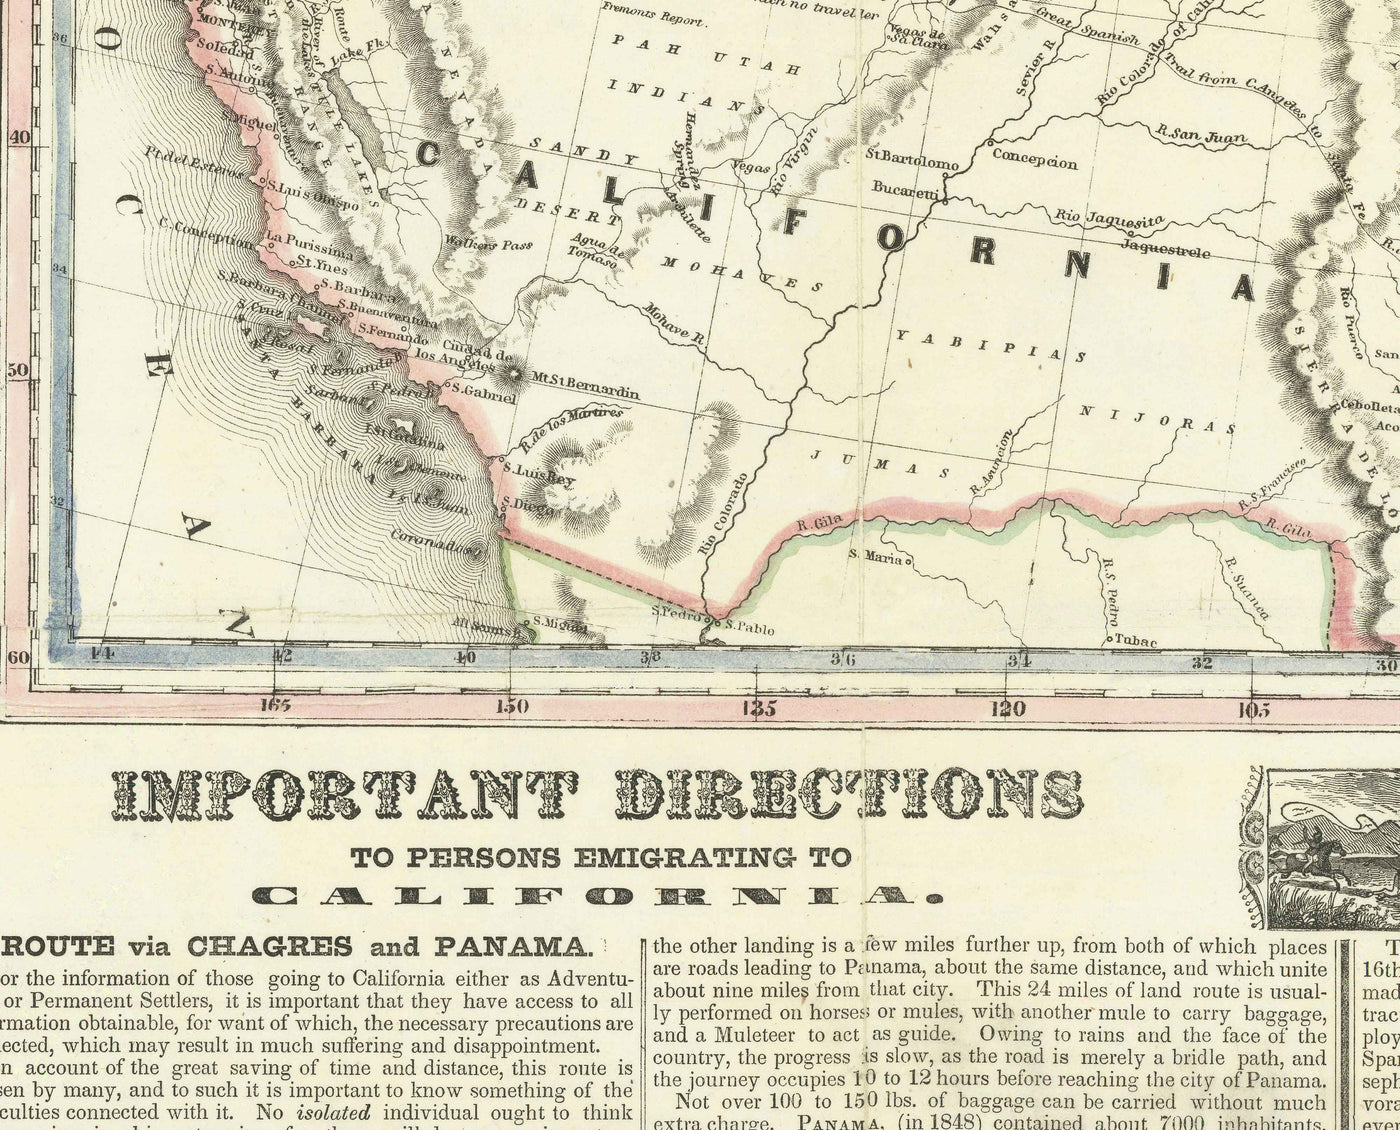 Old Map of the California Gold Rush in 1849 by Ensign & Thayer - Old West, Sacramento, New Mexico, Oregon, Texas